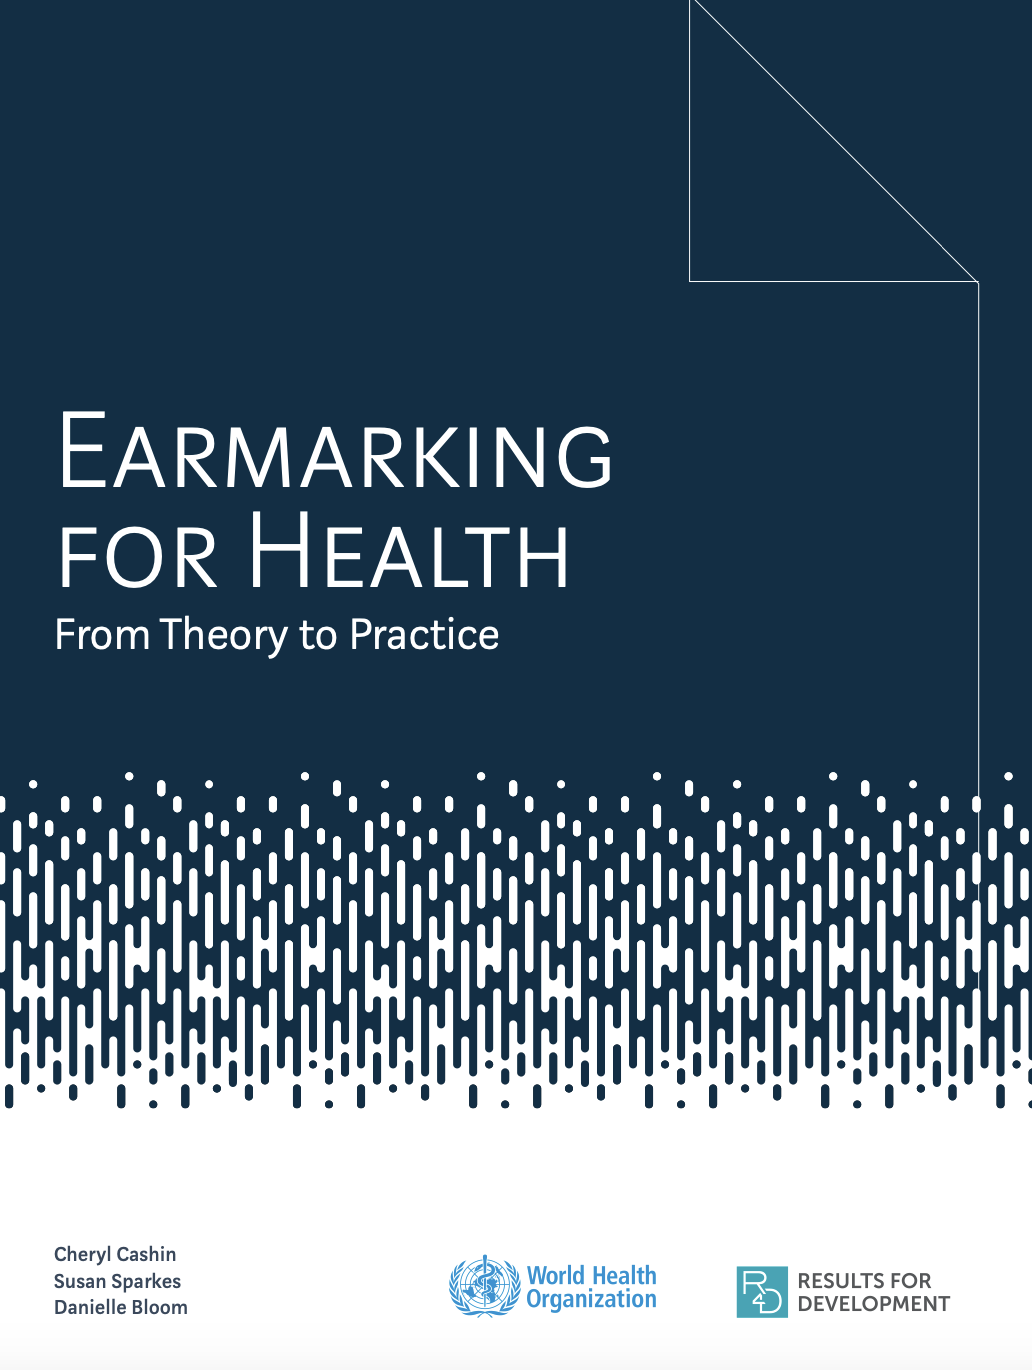 Earmarking for Health From Theory to Practice